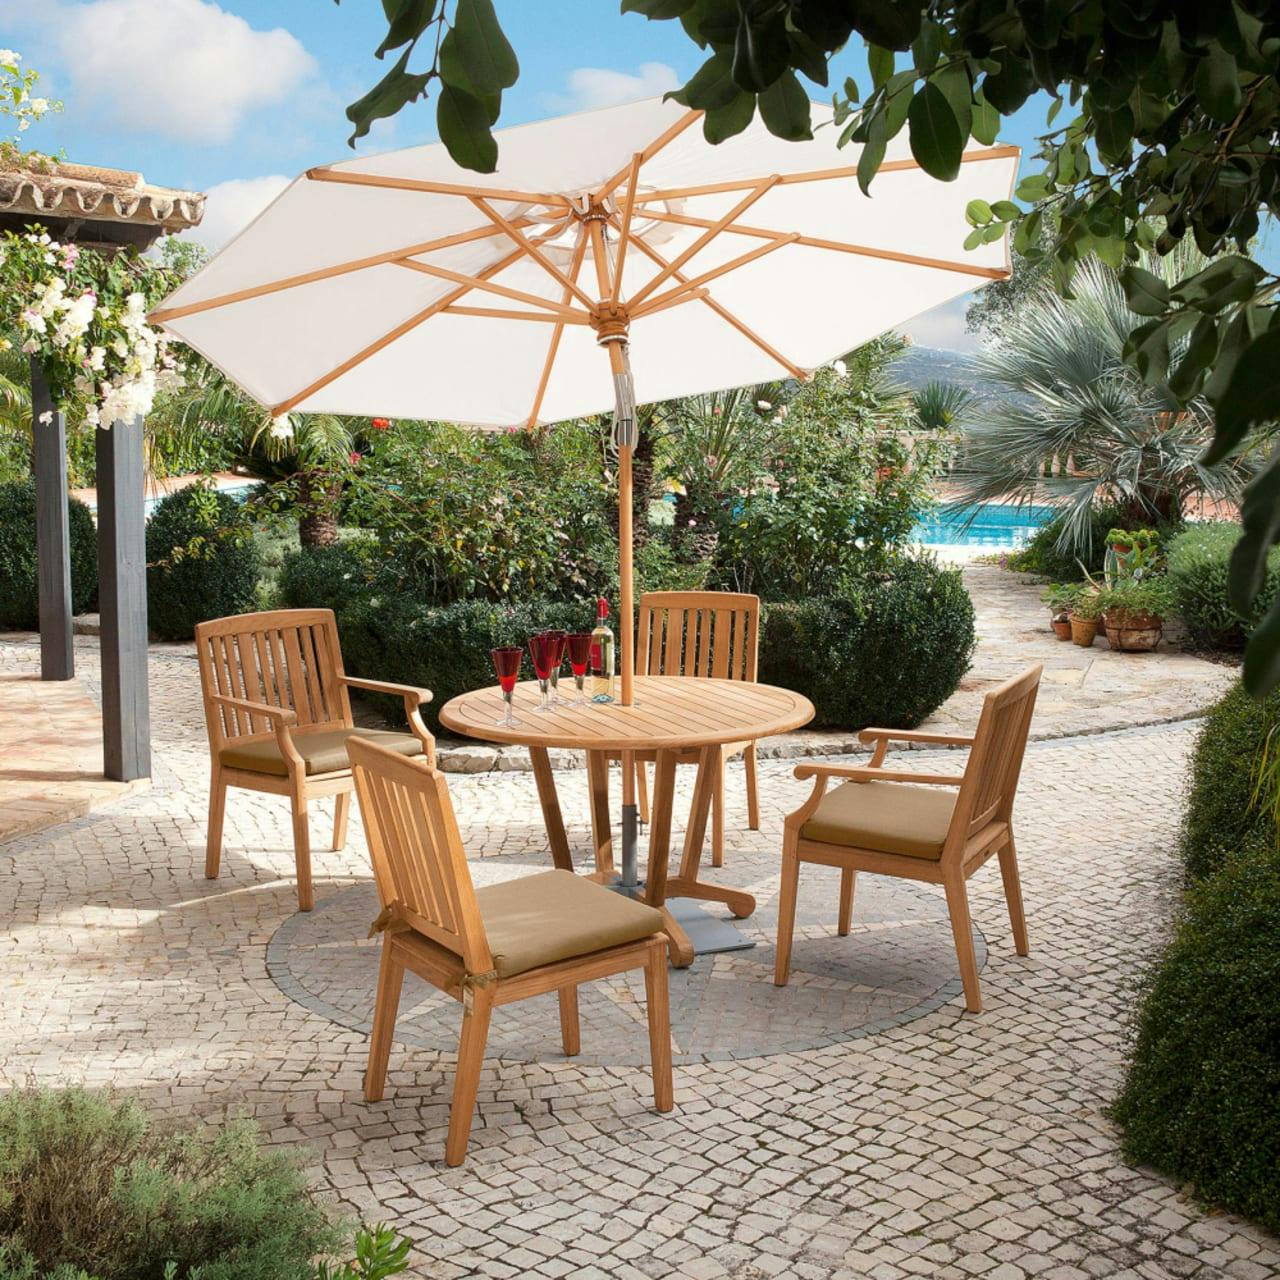 Barlow Tyrie Chesapeake Side Chairs and Armchairs with Chesapeake 45" Round Dining Table and Napoli 9'2" Tilting Umbrella